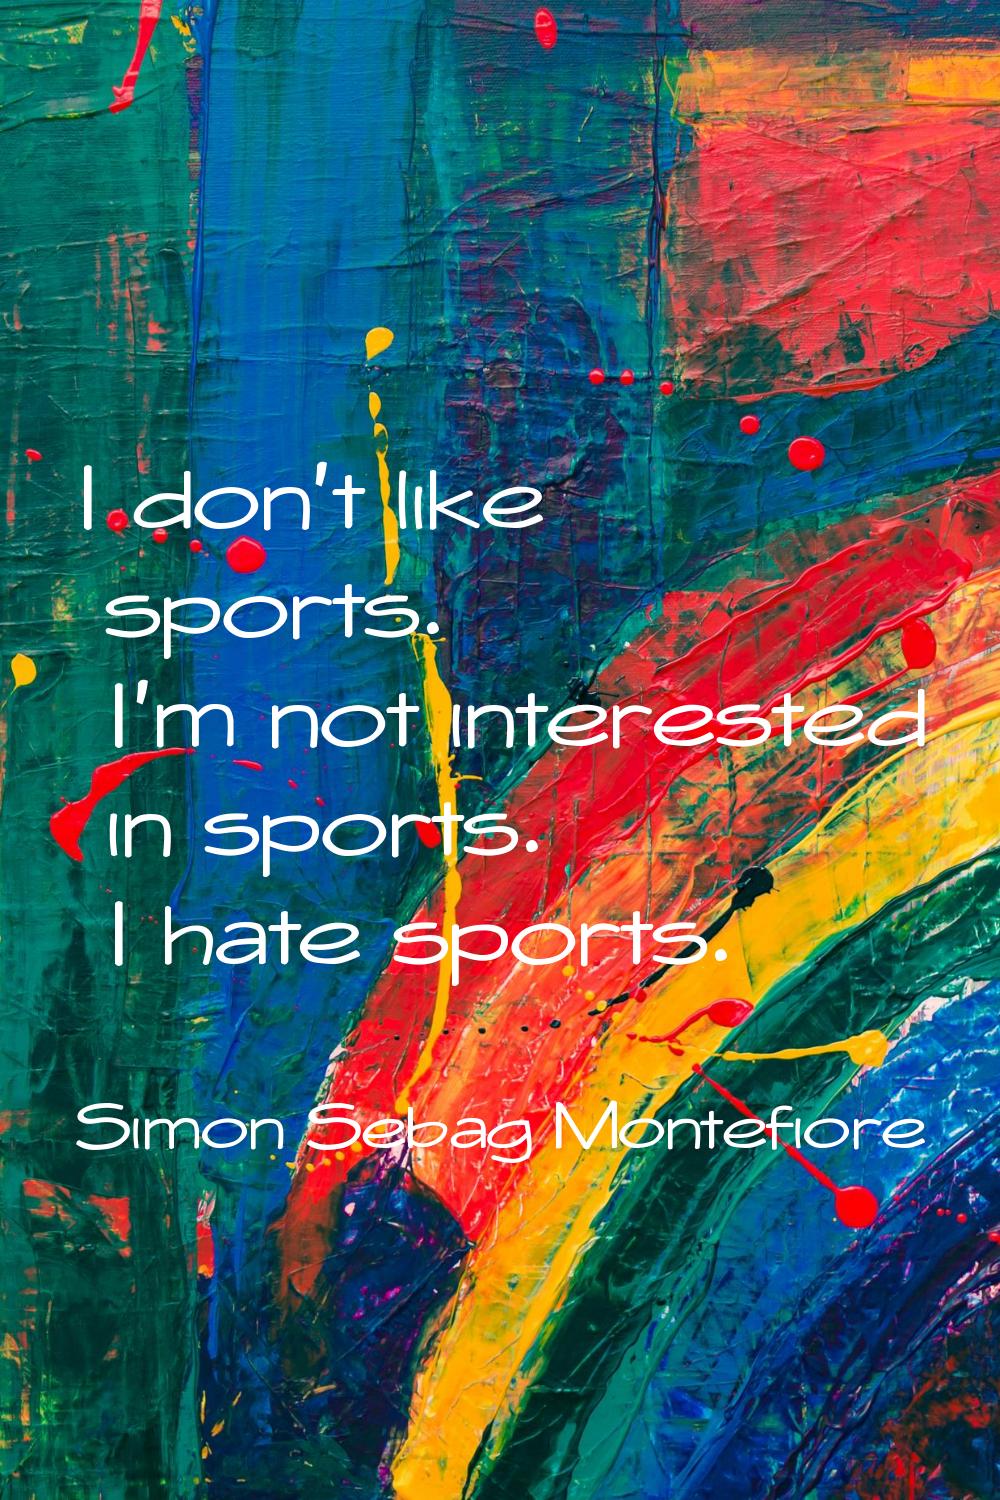 I don't like sports. I'm not interested in sports. I hate sports.